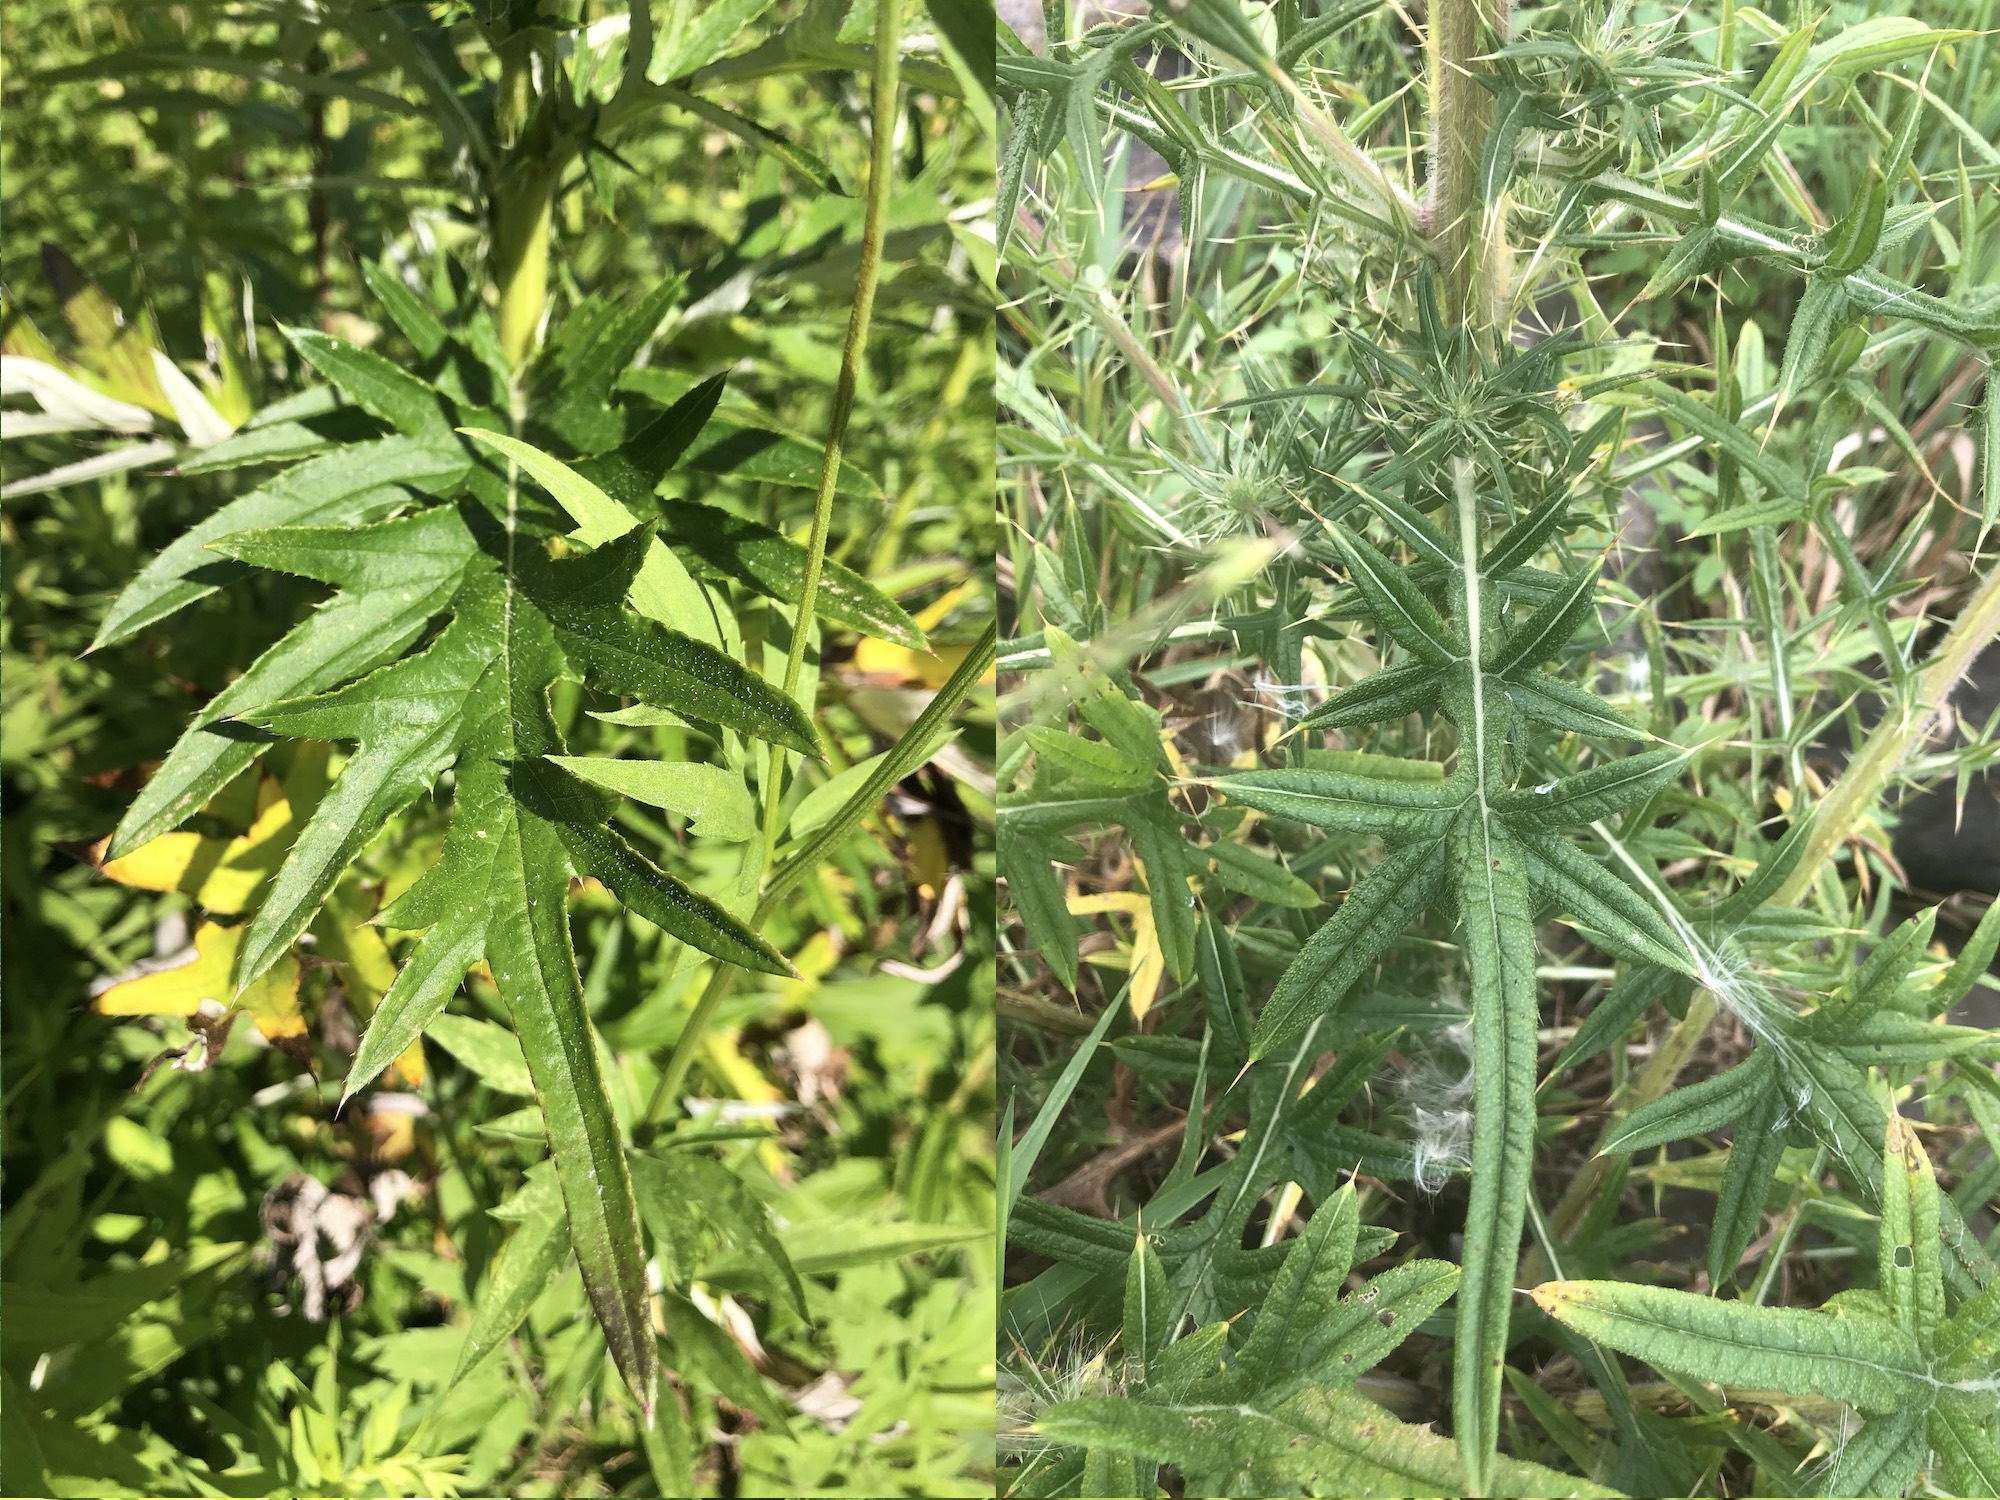 On the left is a lower leaf of a Field Thistle leaf photographed in the UW Arboretum's Curtis Prairie in Madison, Wisconsin and on the right is a Bull Thistle leaf on the shore of Lake Wingra in Vilas Park on August 15, 2022.